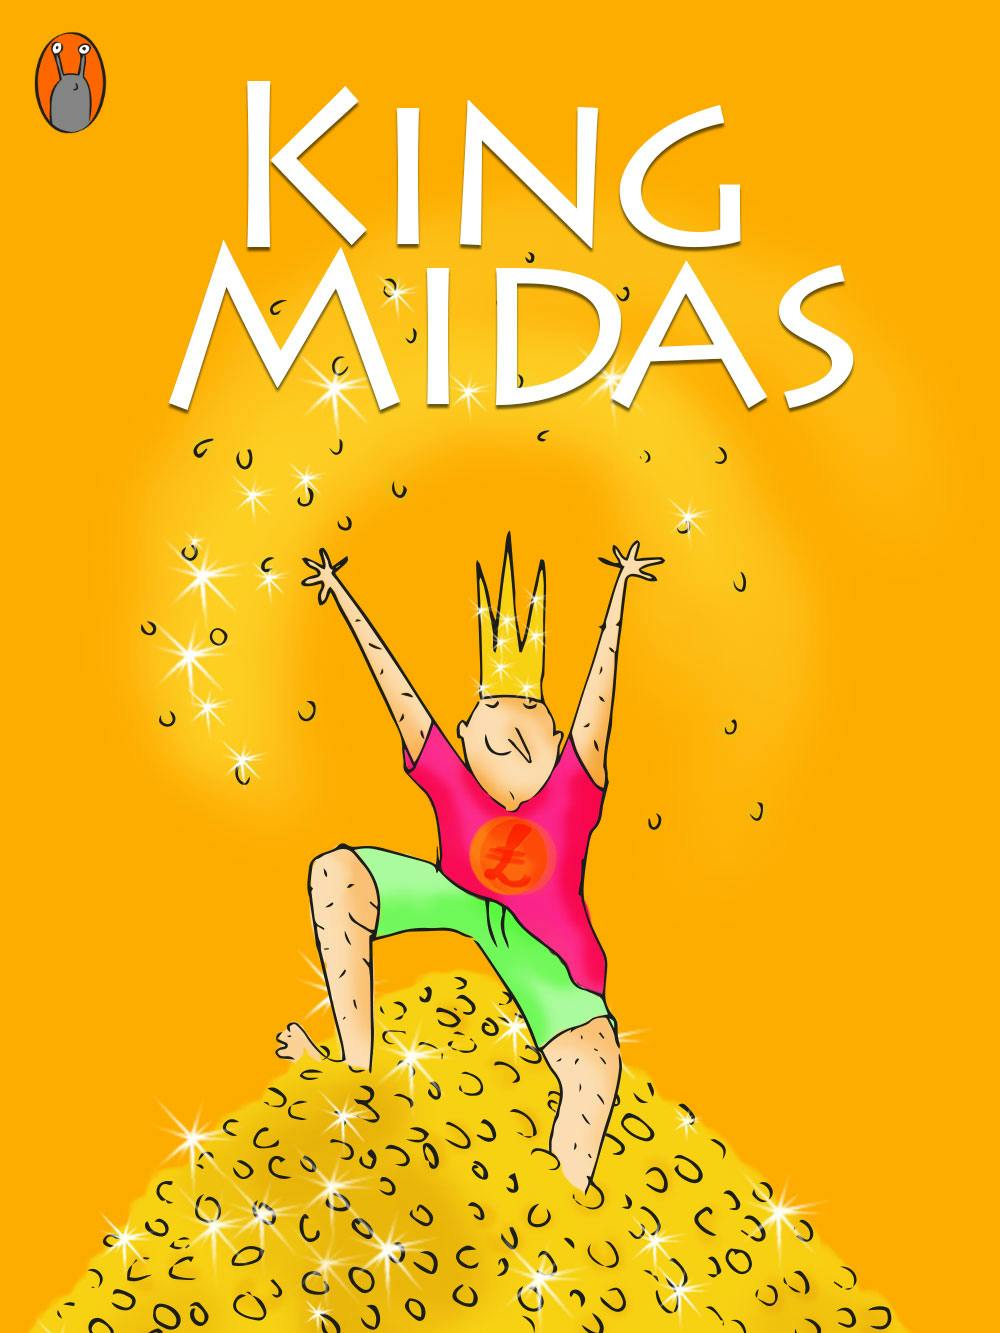 The golden touch. Midas was the richest man in the world…, by Katha Kids, Katha Kids